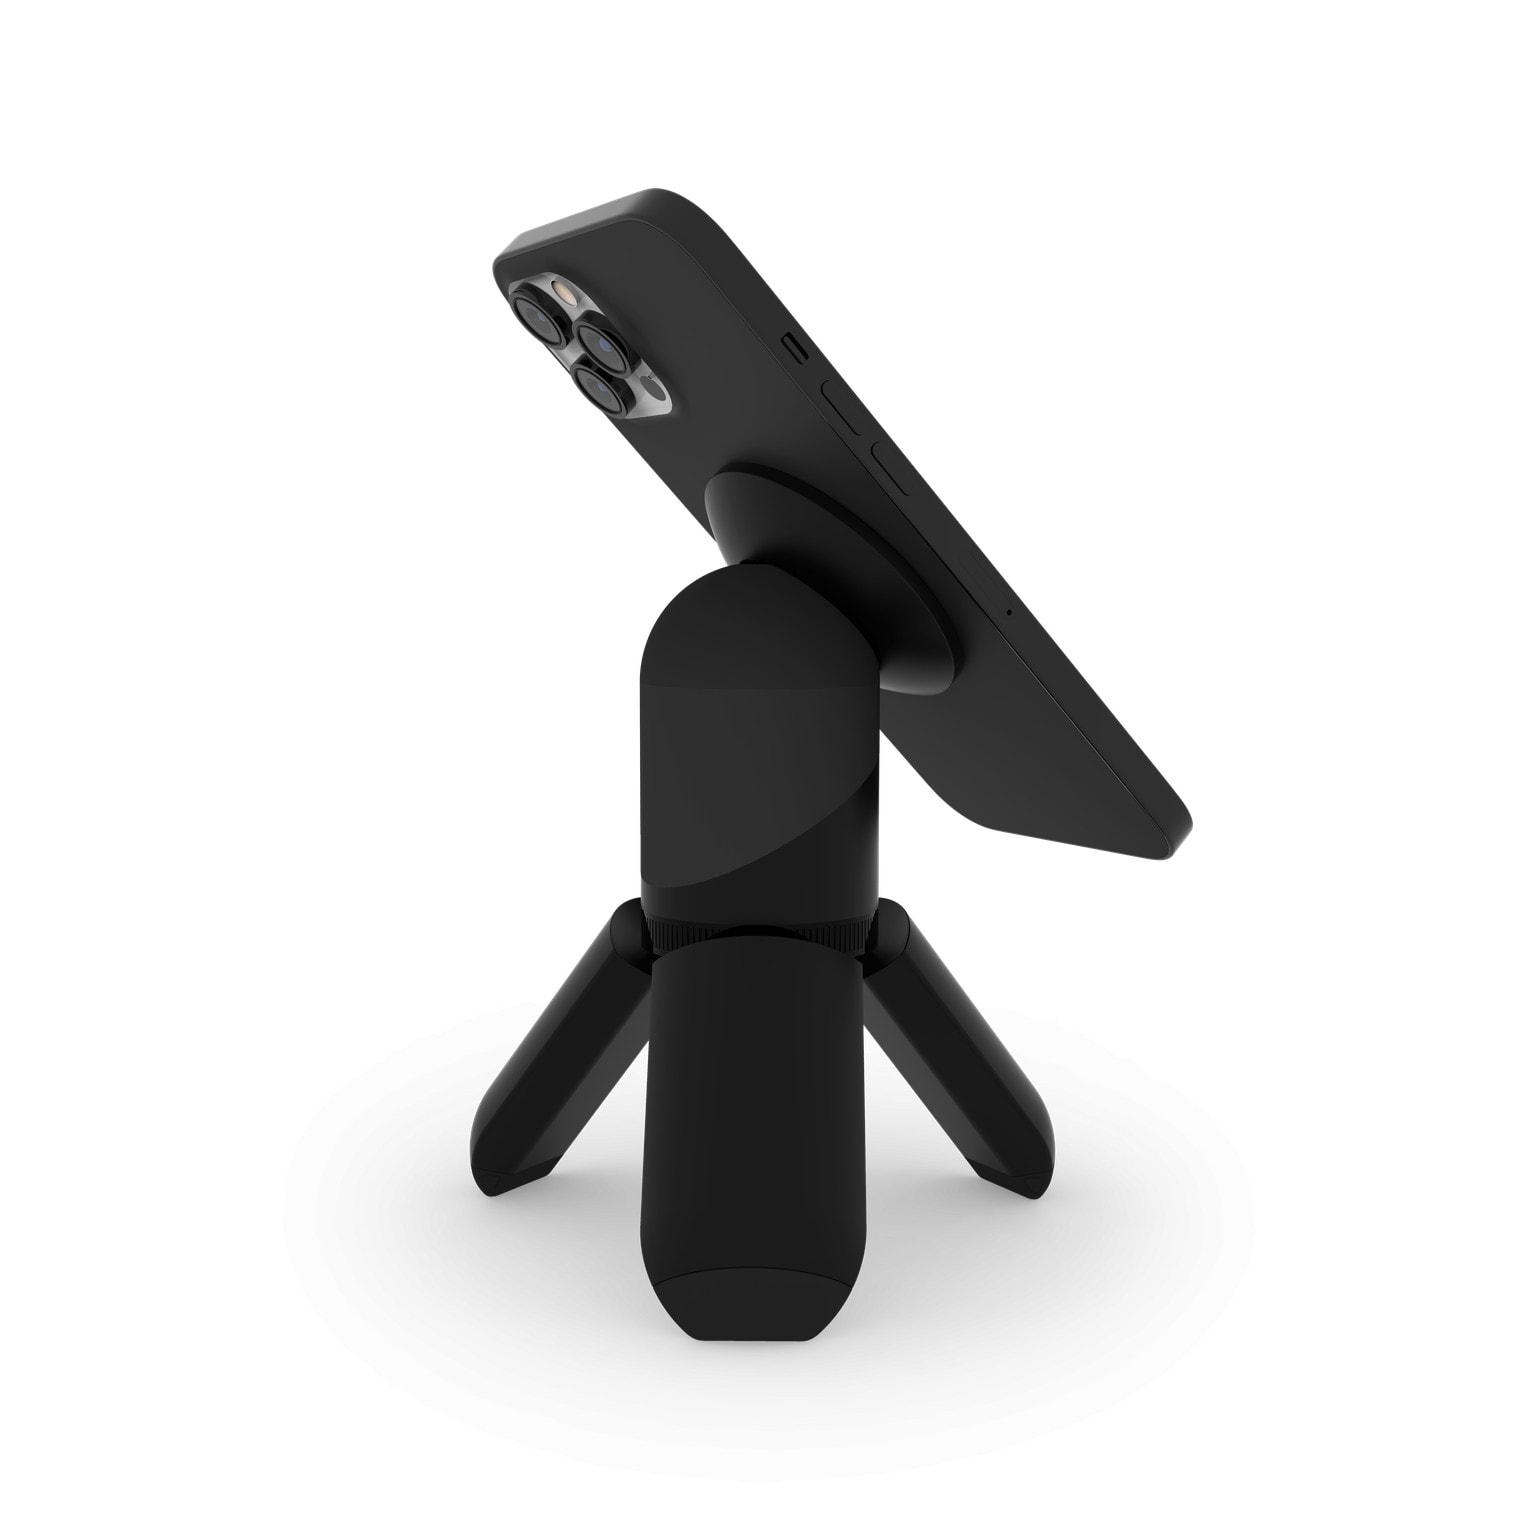 STM Goods MagPod is a mini tripod that can also be a handle.